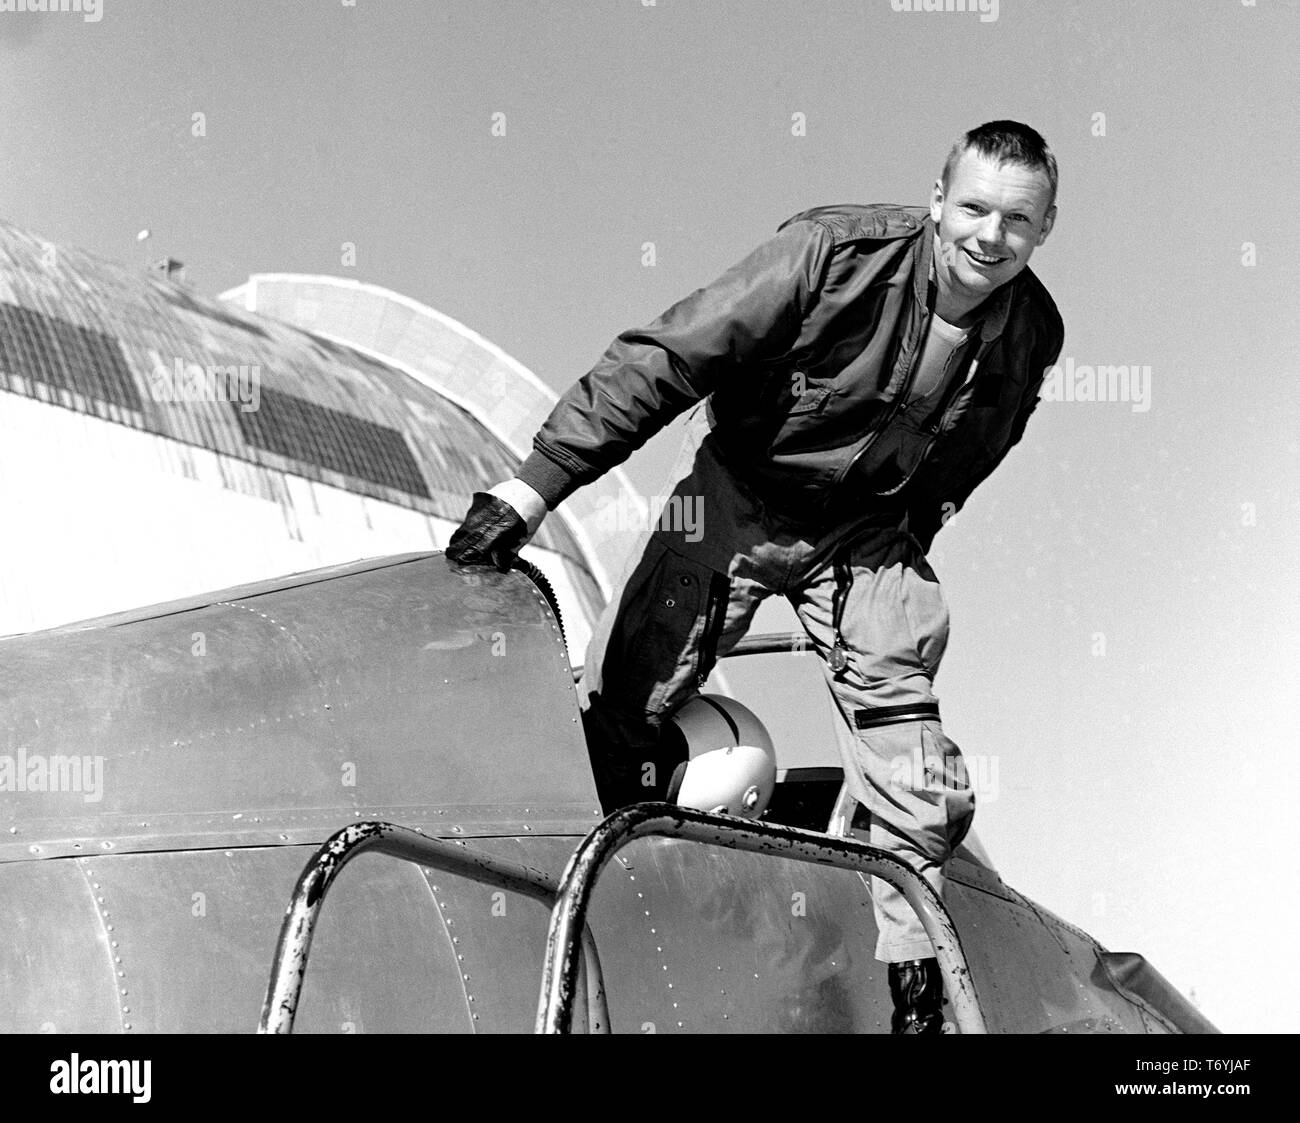 Photograph of Neil Armstrong in the cockpit of the Ames Bell X-14 airplane at NASA's Ames Research Center, Moffett Field, California, 1955. Image courtesy National Aeronautics and Space Administration (NASA). () Stock Photo